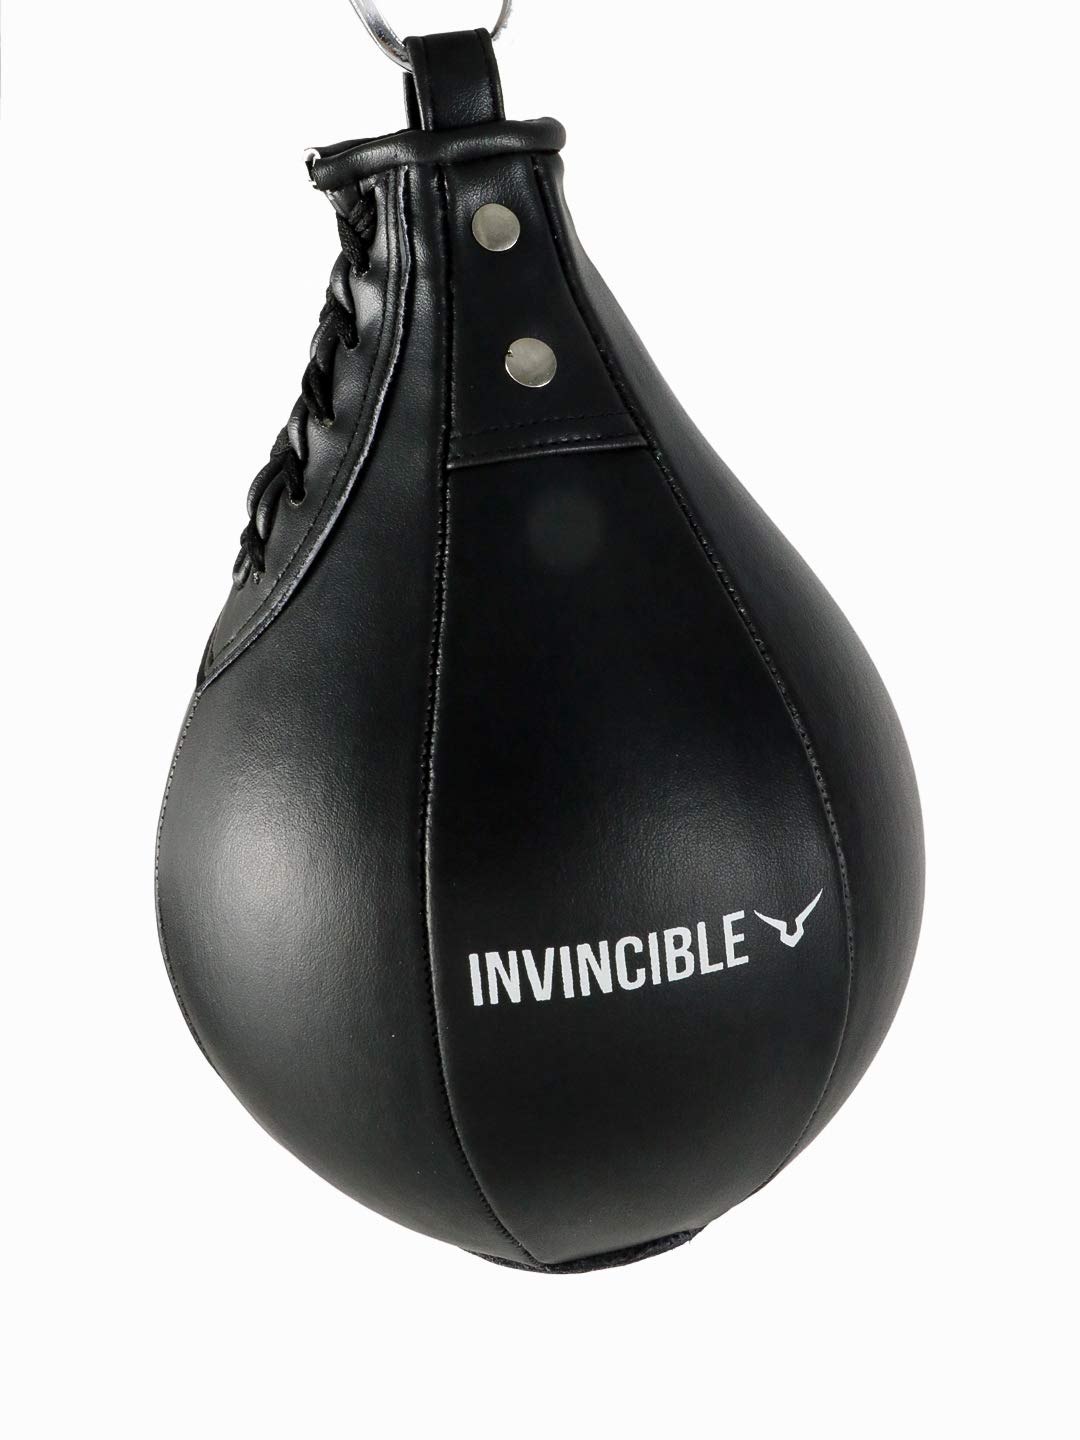 Invincible Synthetic Leather Speed Ball